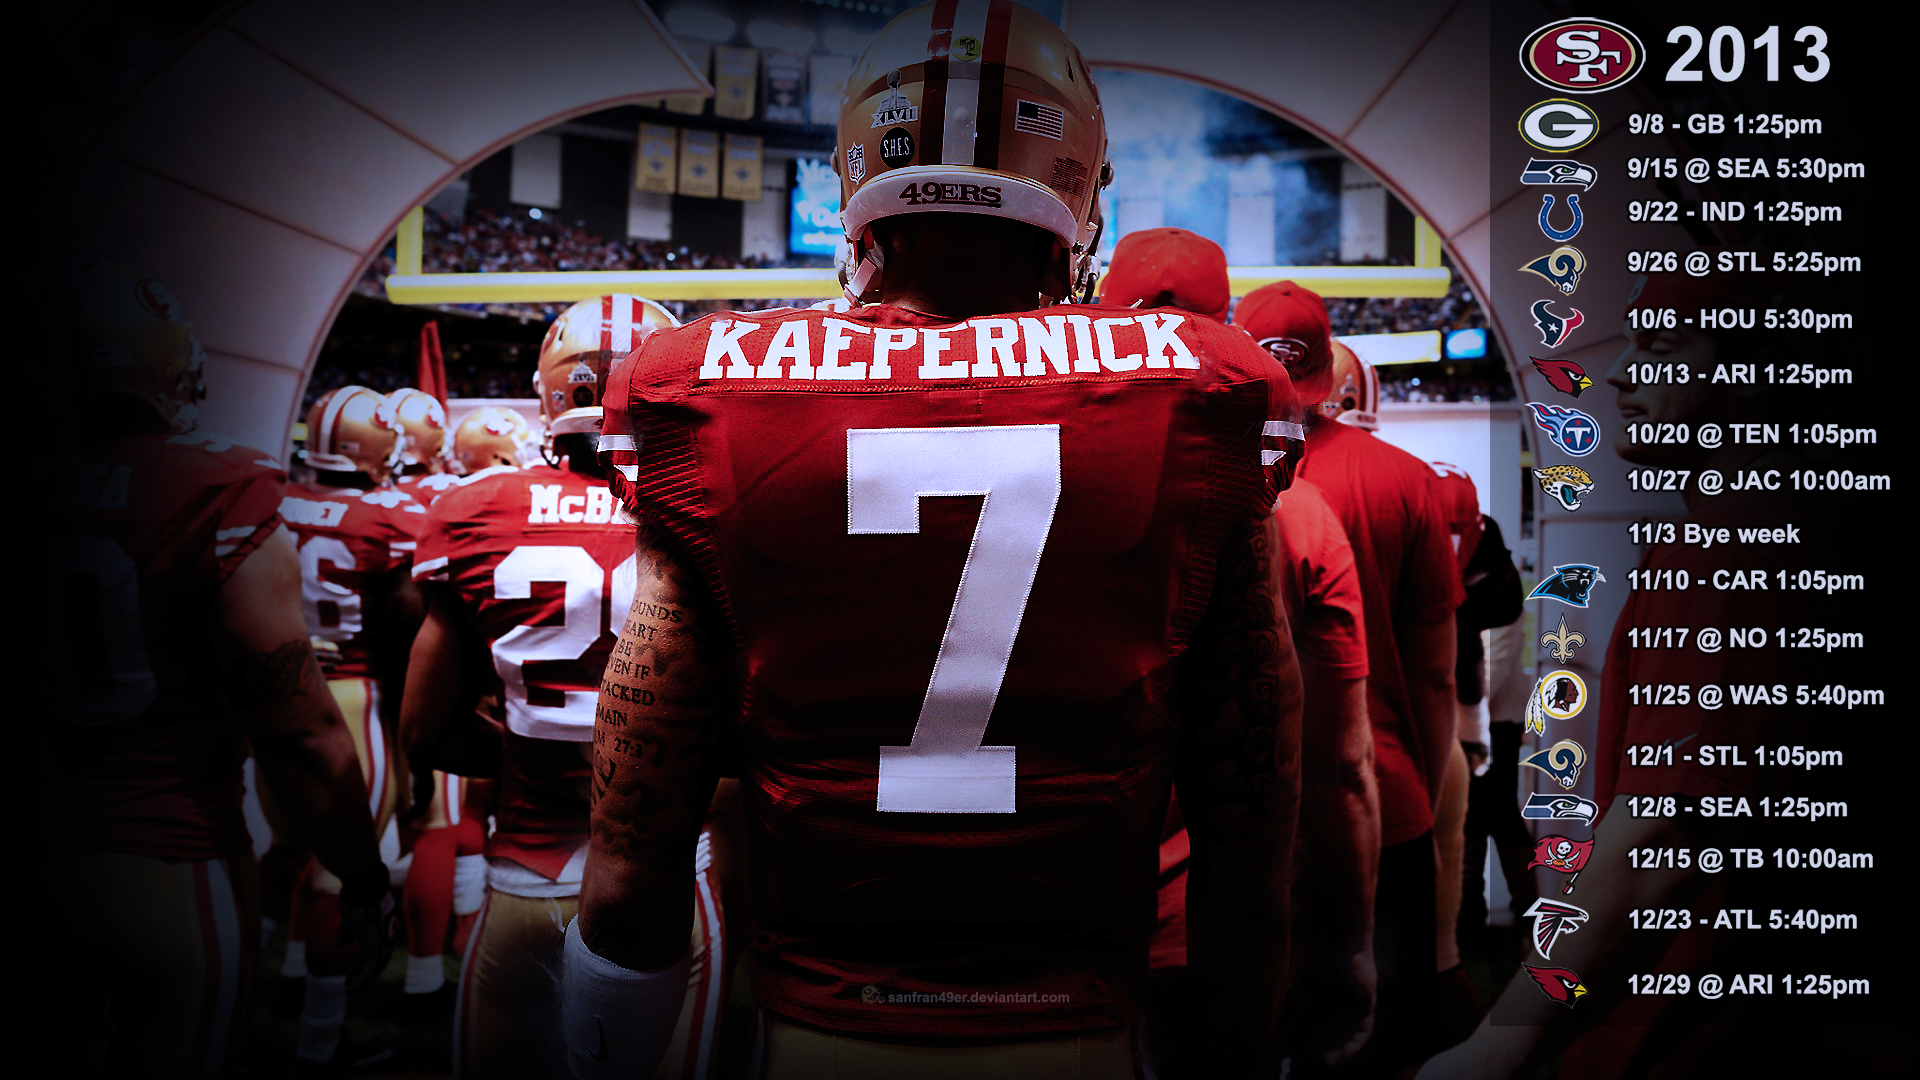 Kaepernick Wallpaper with 2013 schedule PST by SanFran49er on